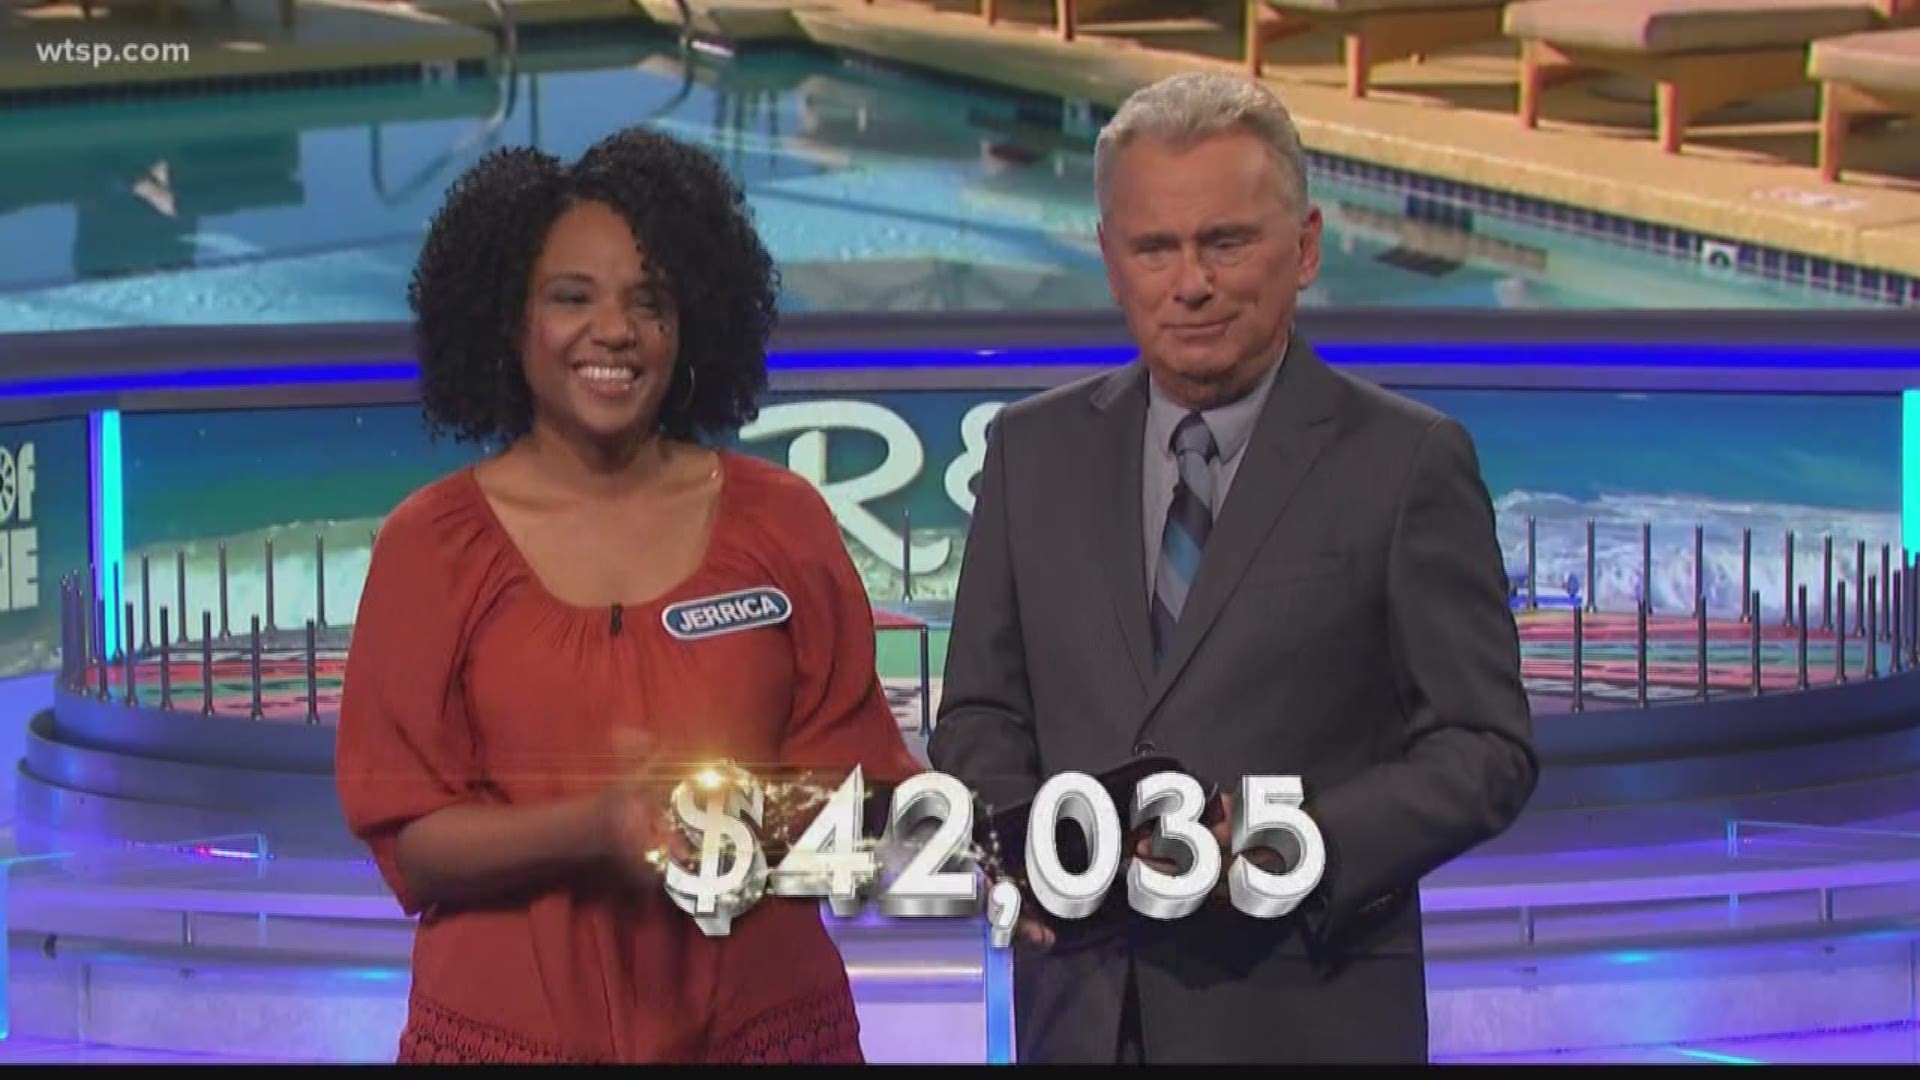 Jerrica Stovall won thousands of dollars on the popular game show. Also, an uninvited wedding is arrested after he jumped into the couple's first dance.